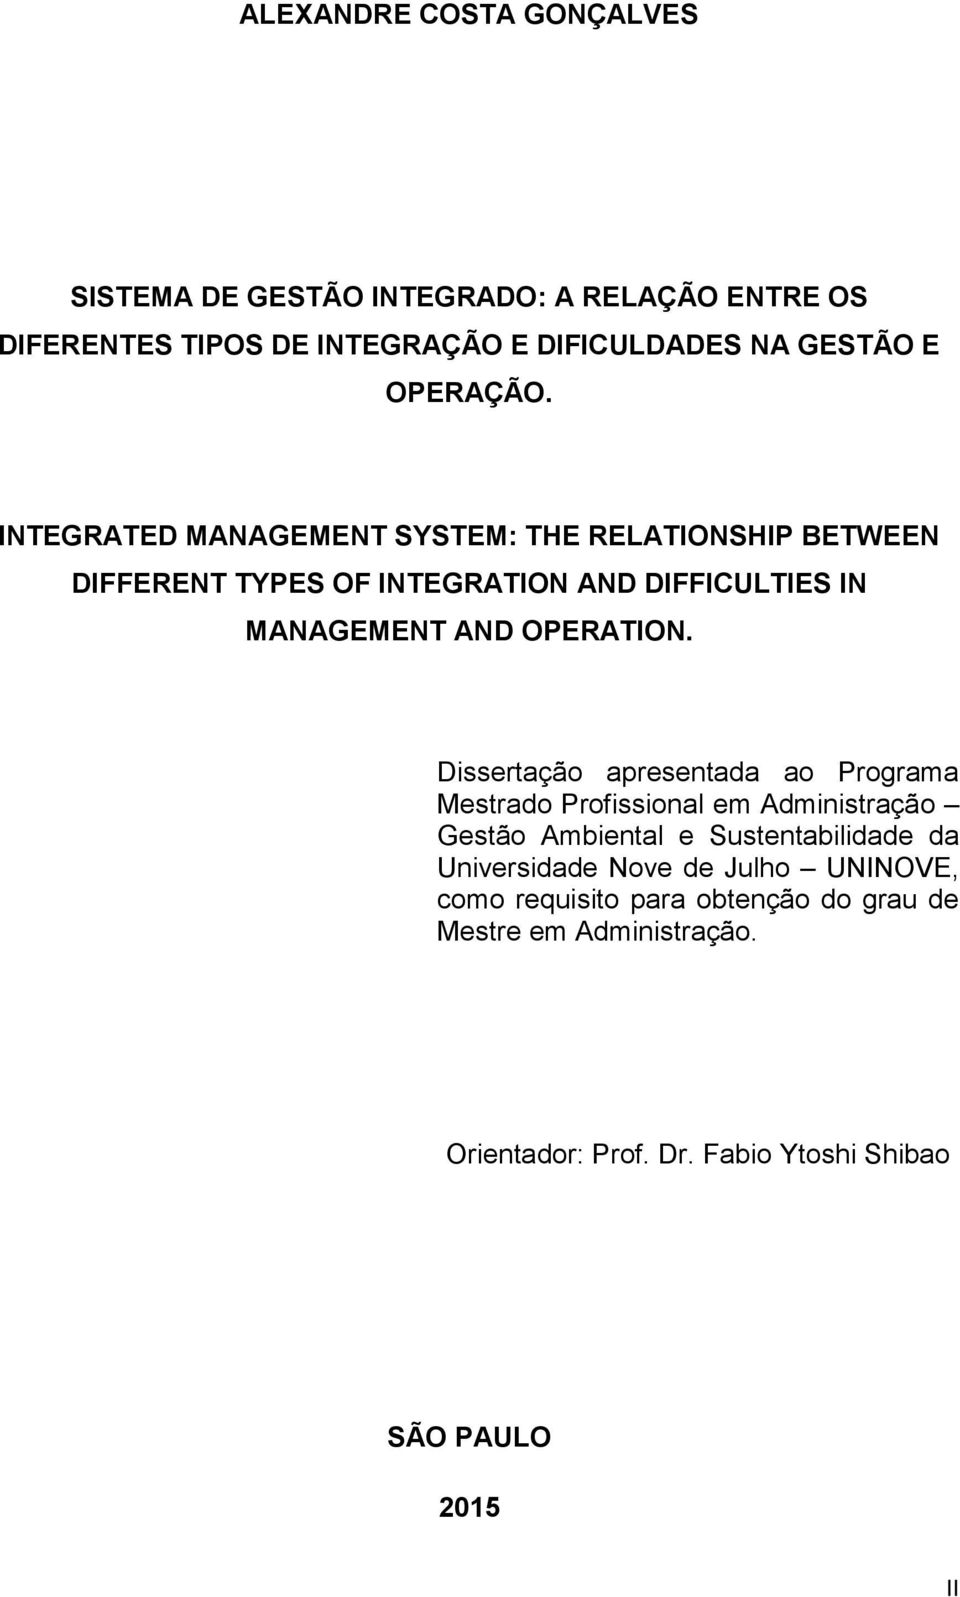 INTEGRATED MANAGEMENT SYSTEM: THE RELATIONSHIP BETWEEN DIFFERENT TYPES OF INTEGRATION AND DIFFICULTIES IN MANAGEMENT AND OPERATION.